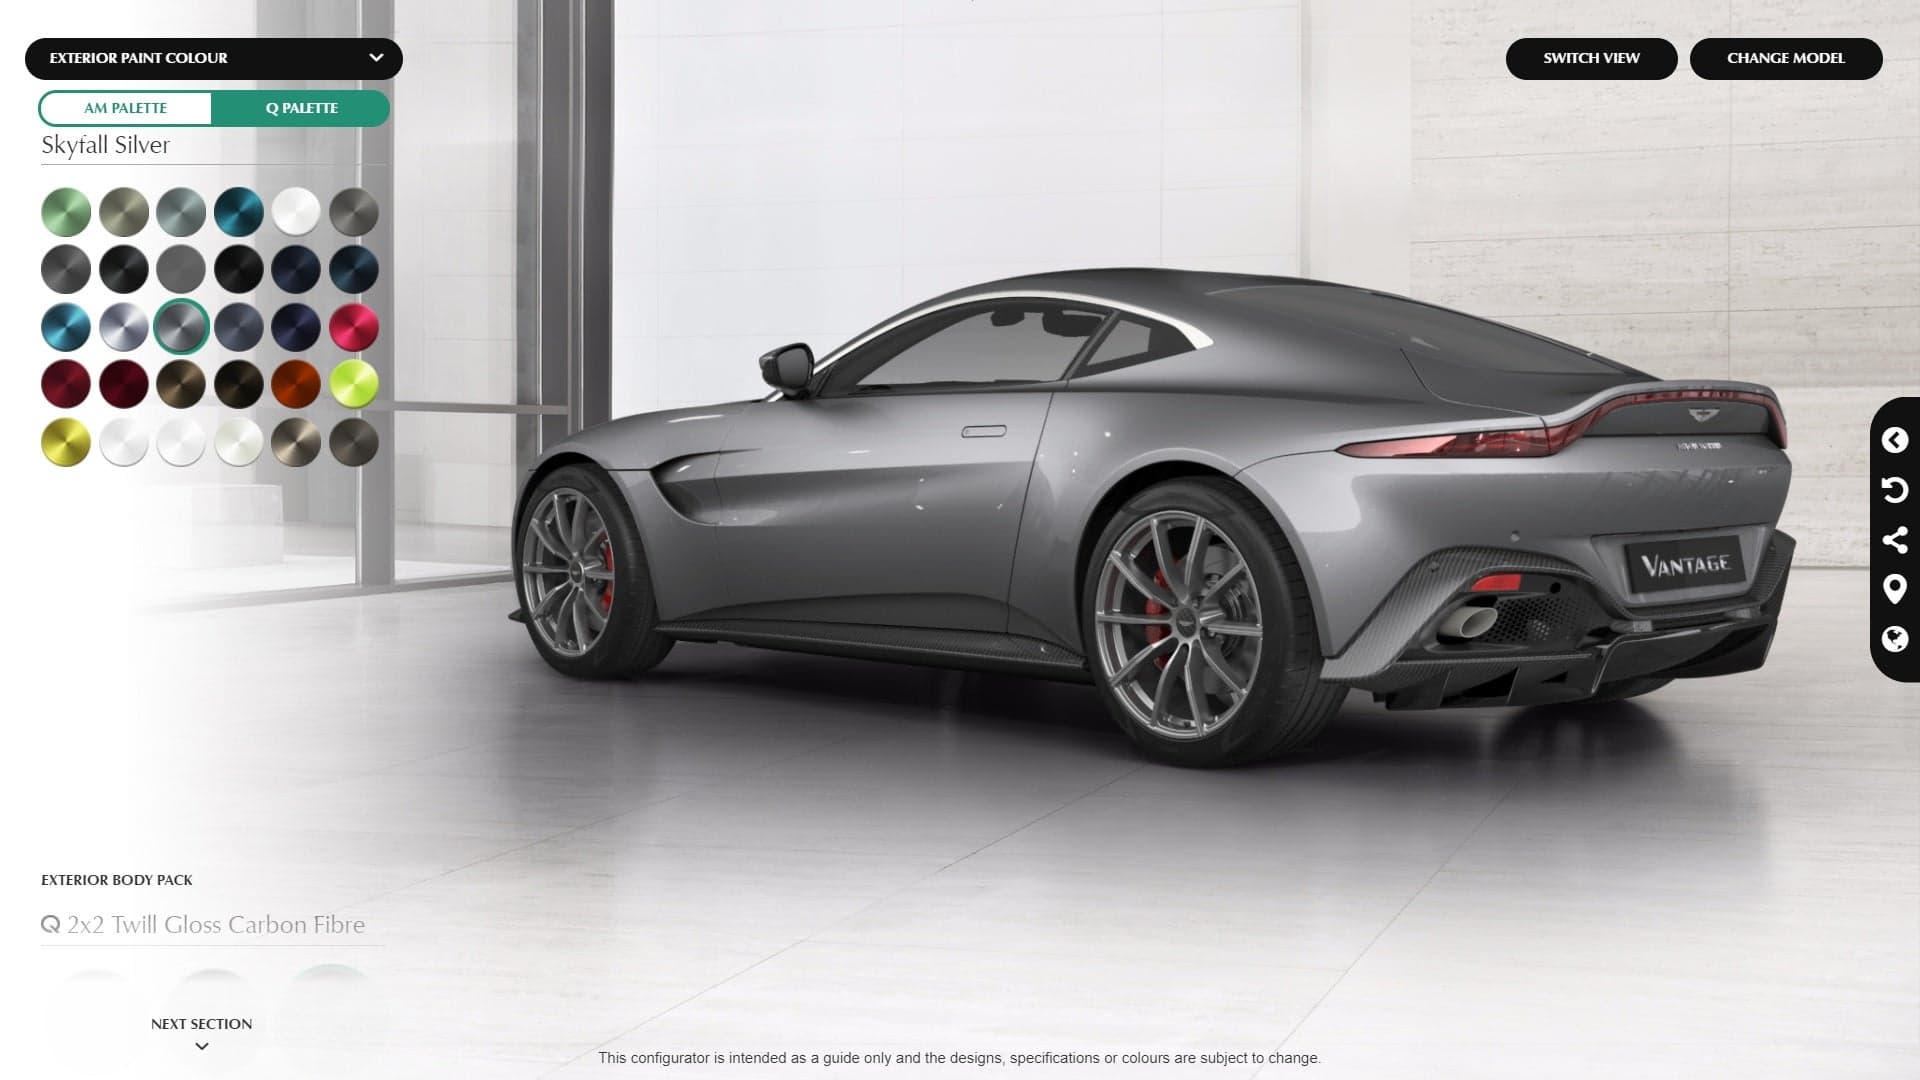 Avoid Your Family This Thanksgiving with Aston Martin’s Vantage Configurator